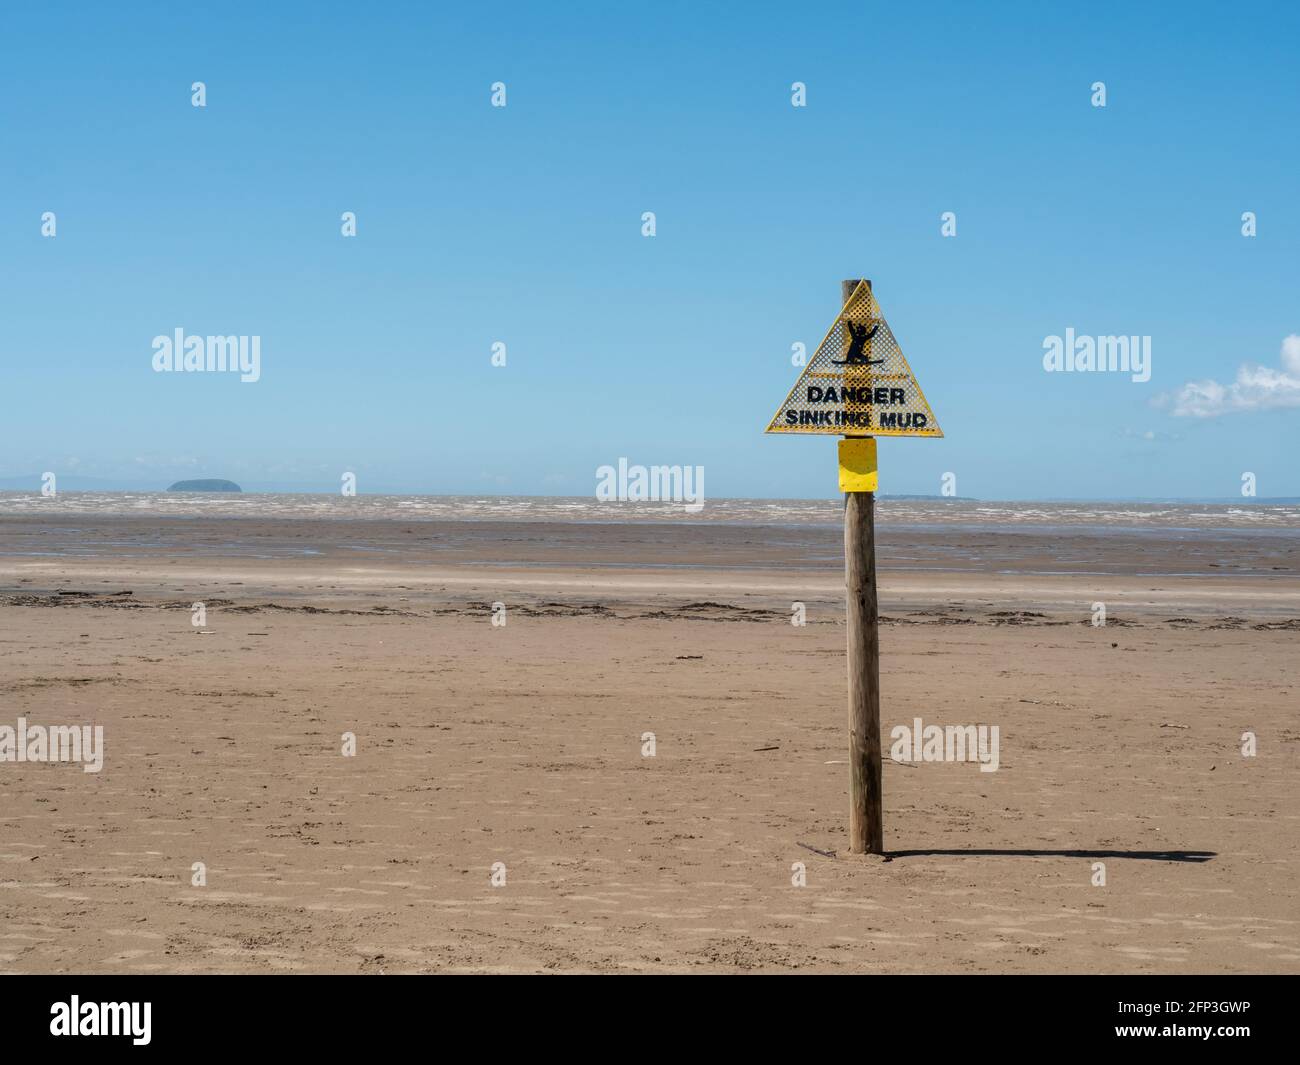 A warning sign about the danger of sinking mud at low tide, in Sand Bay, near Weston-super-Mare, in North Somerset. Stock Photo